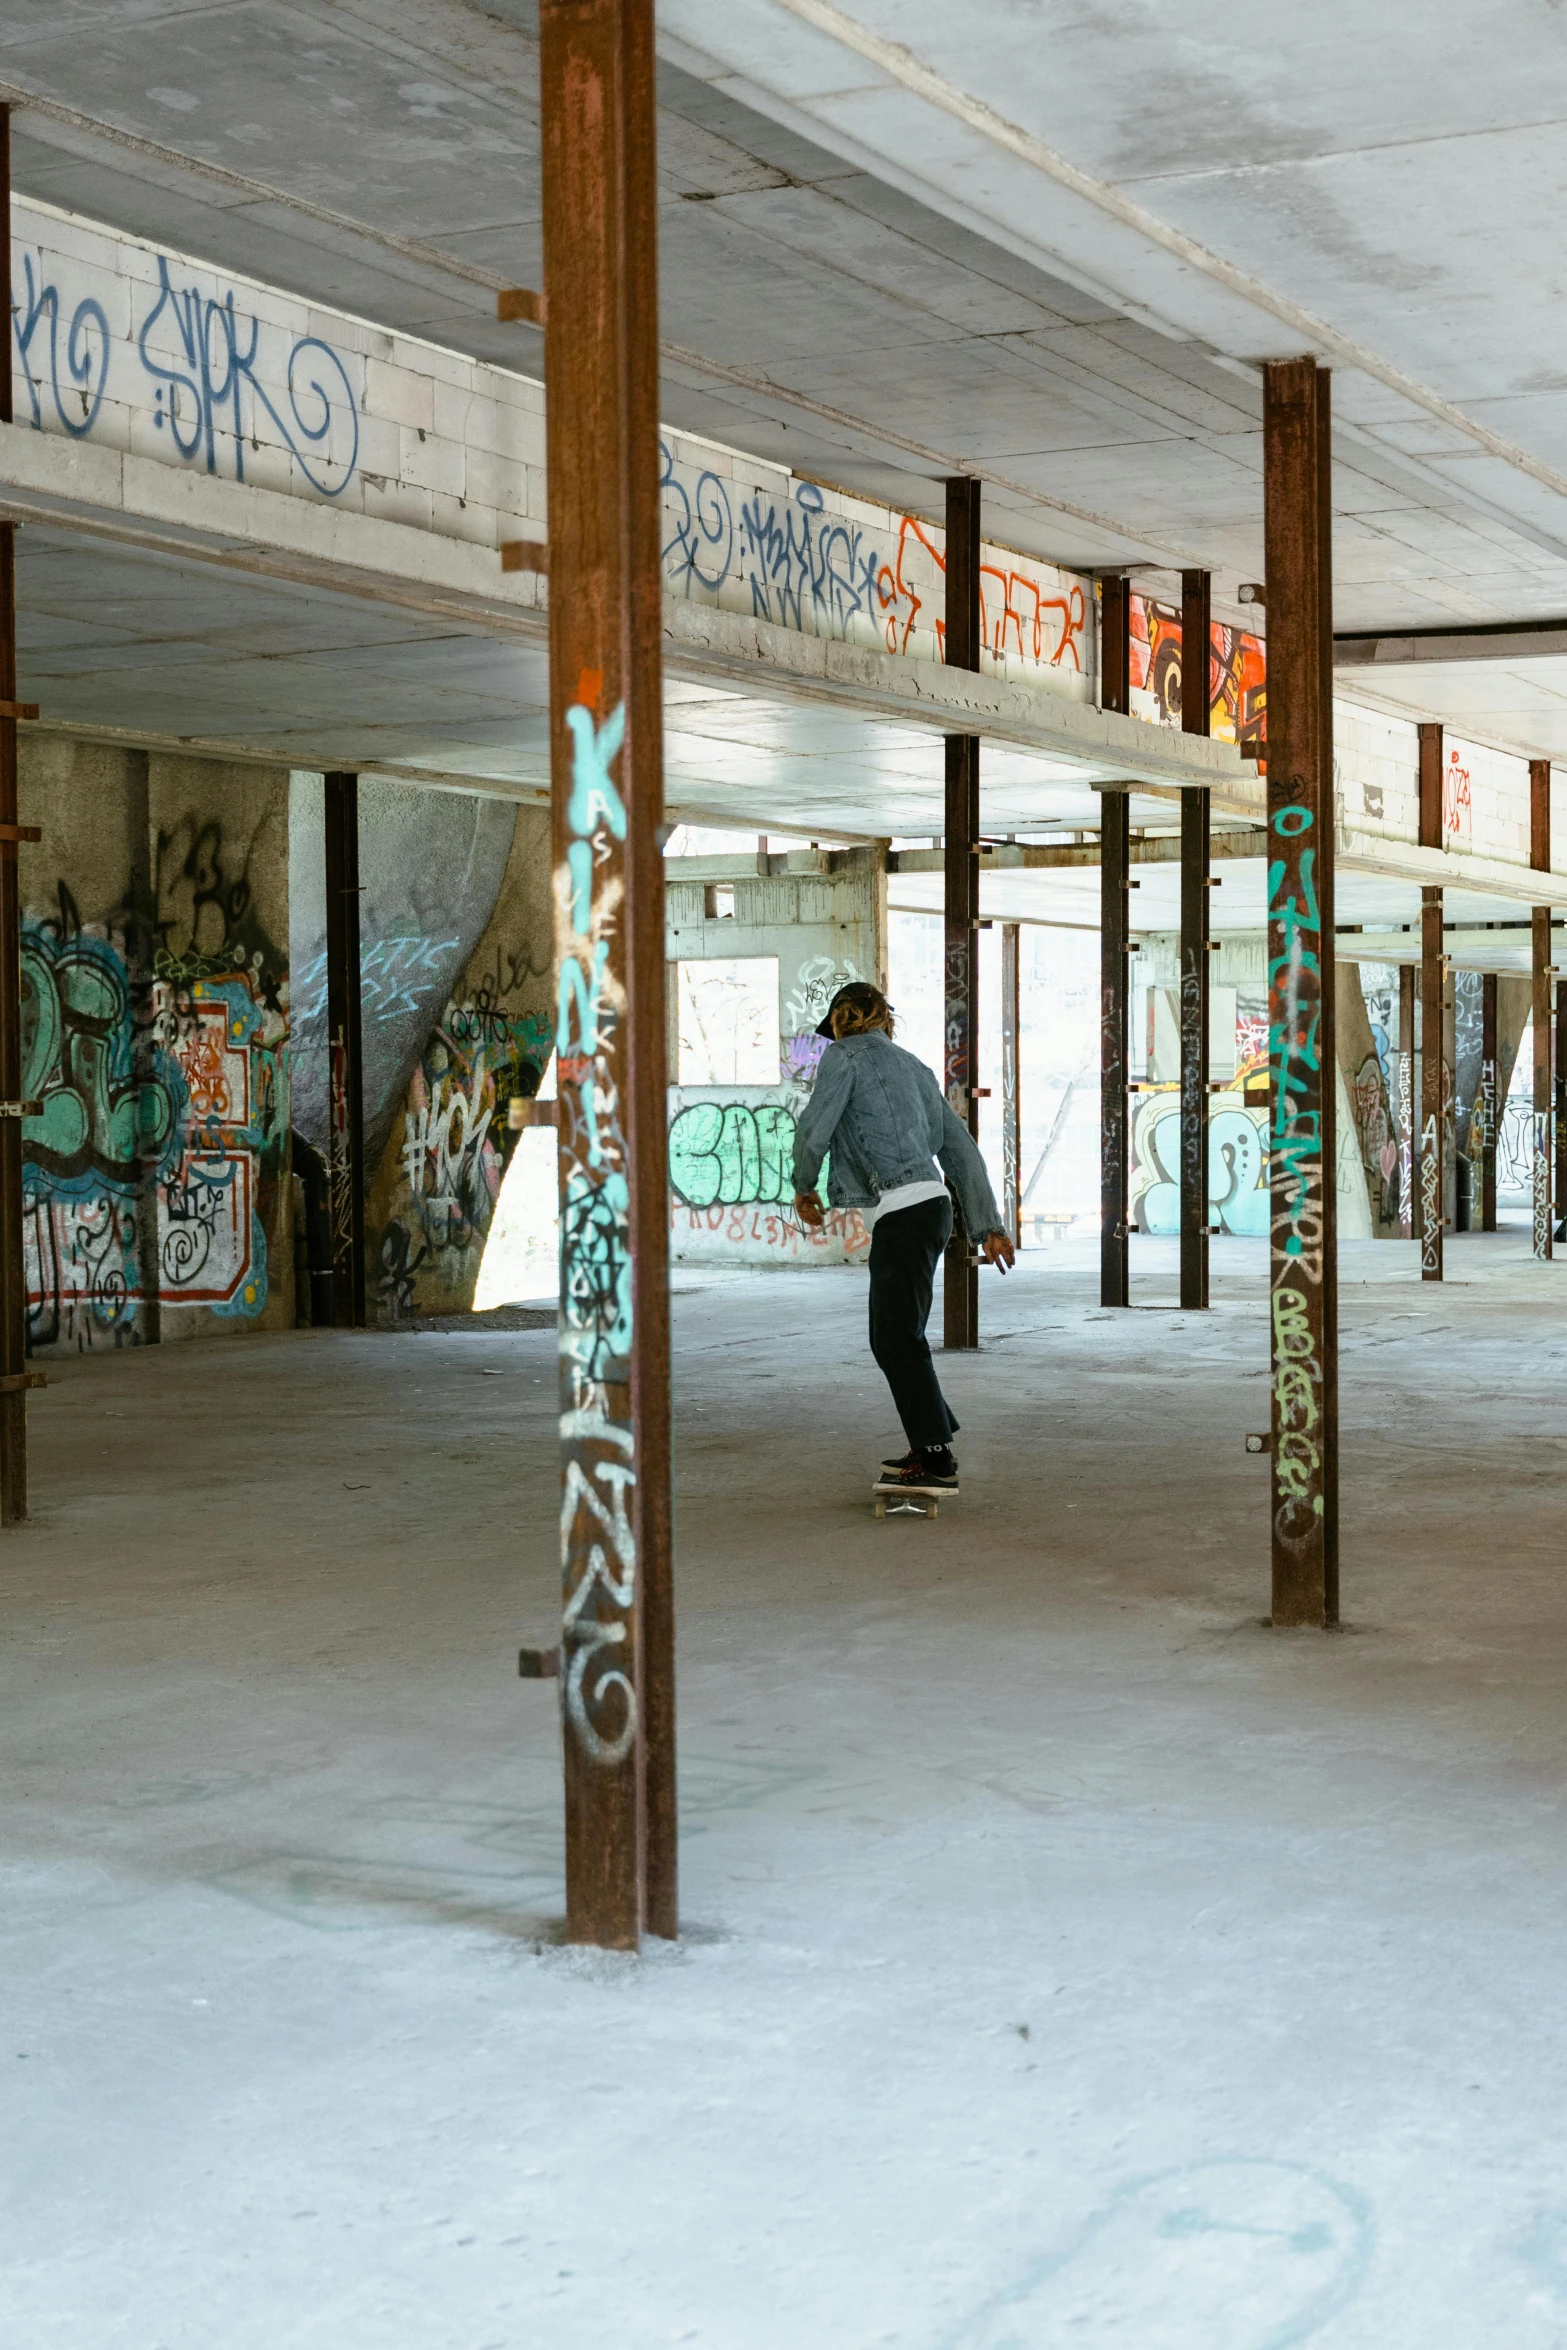 a man riding a skateboard inside of a building, graffiti, old lumber mill remains, concrete pillars, office/thrift store/social hall, six sided